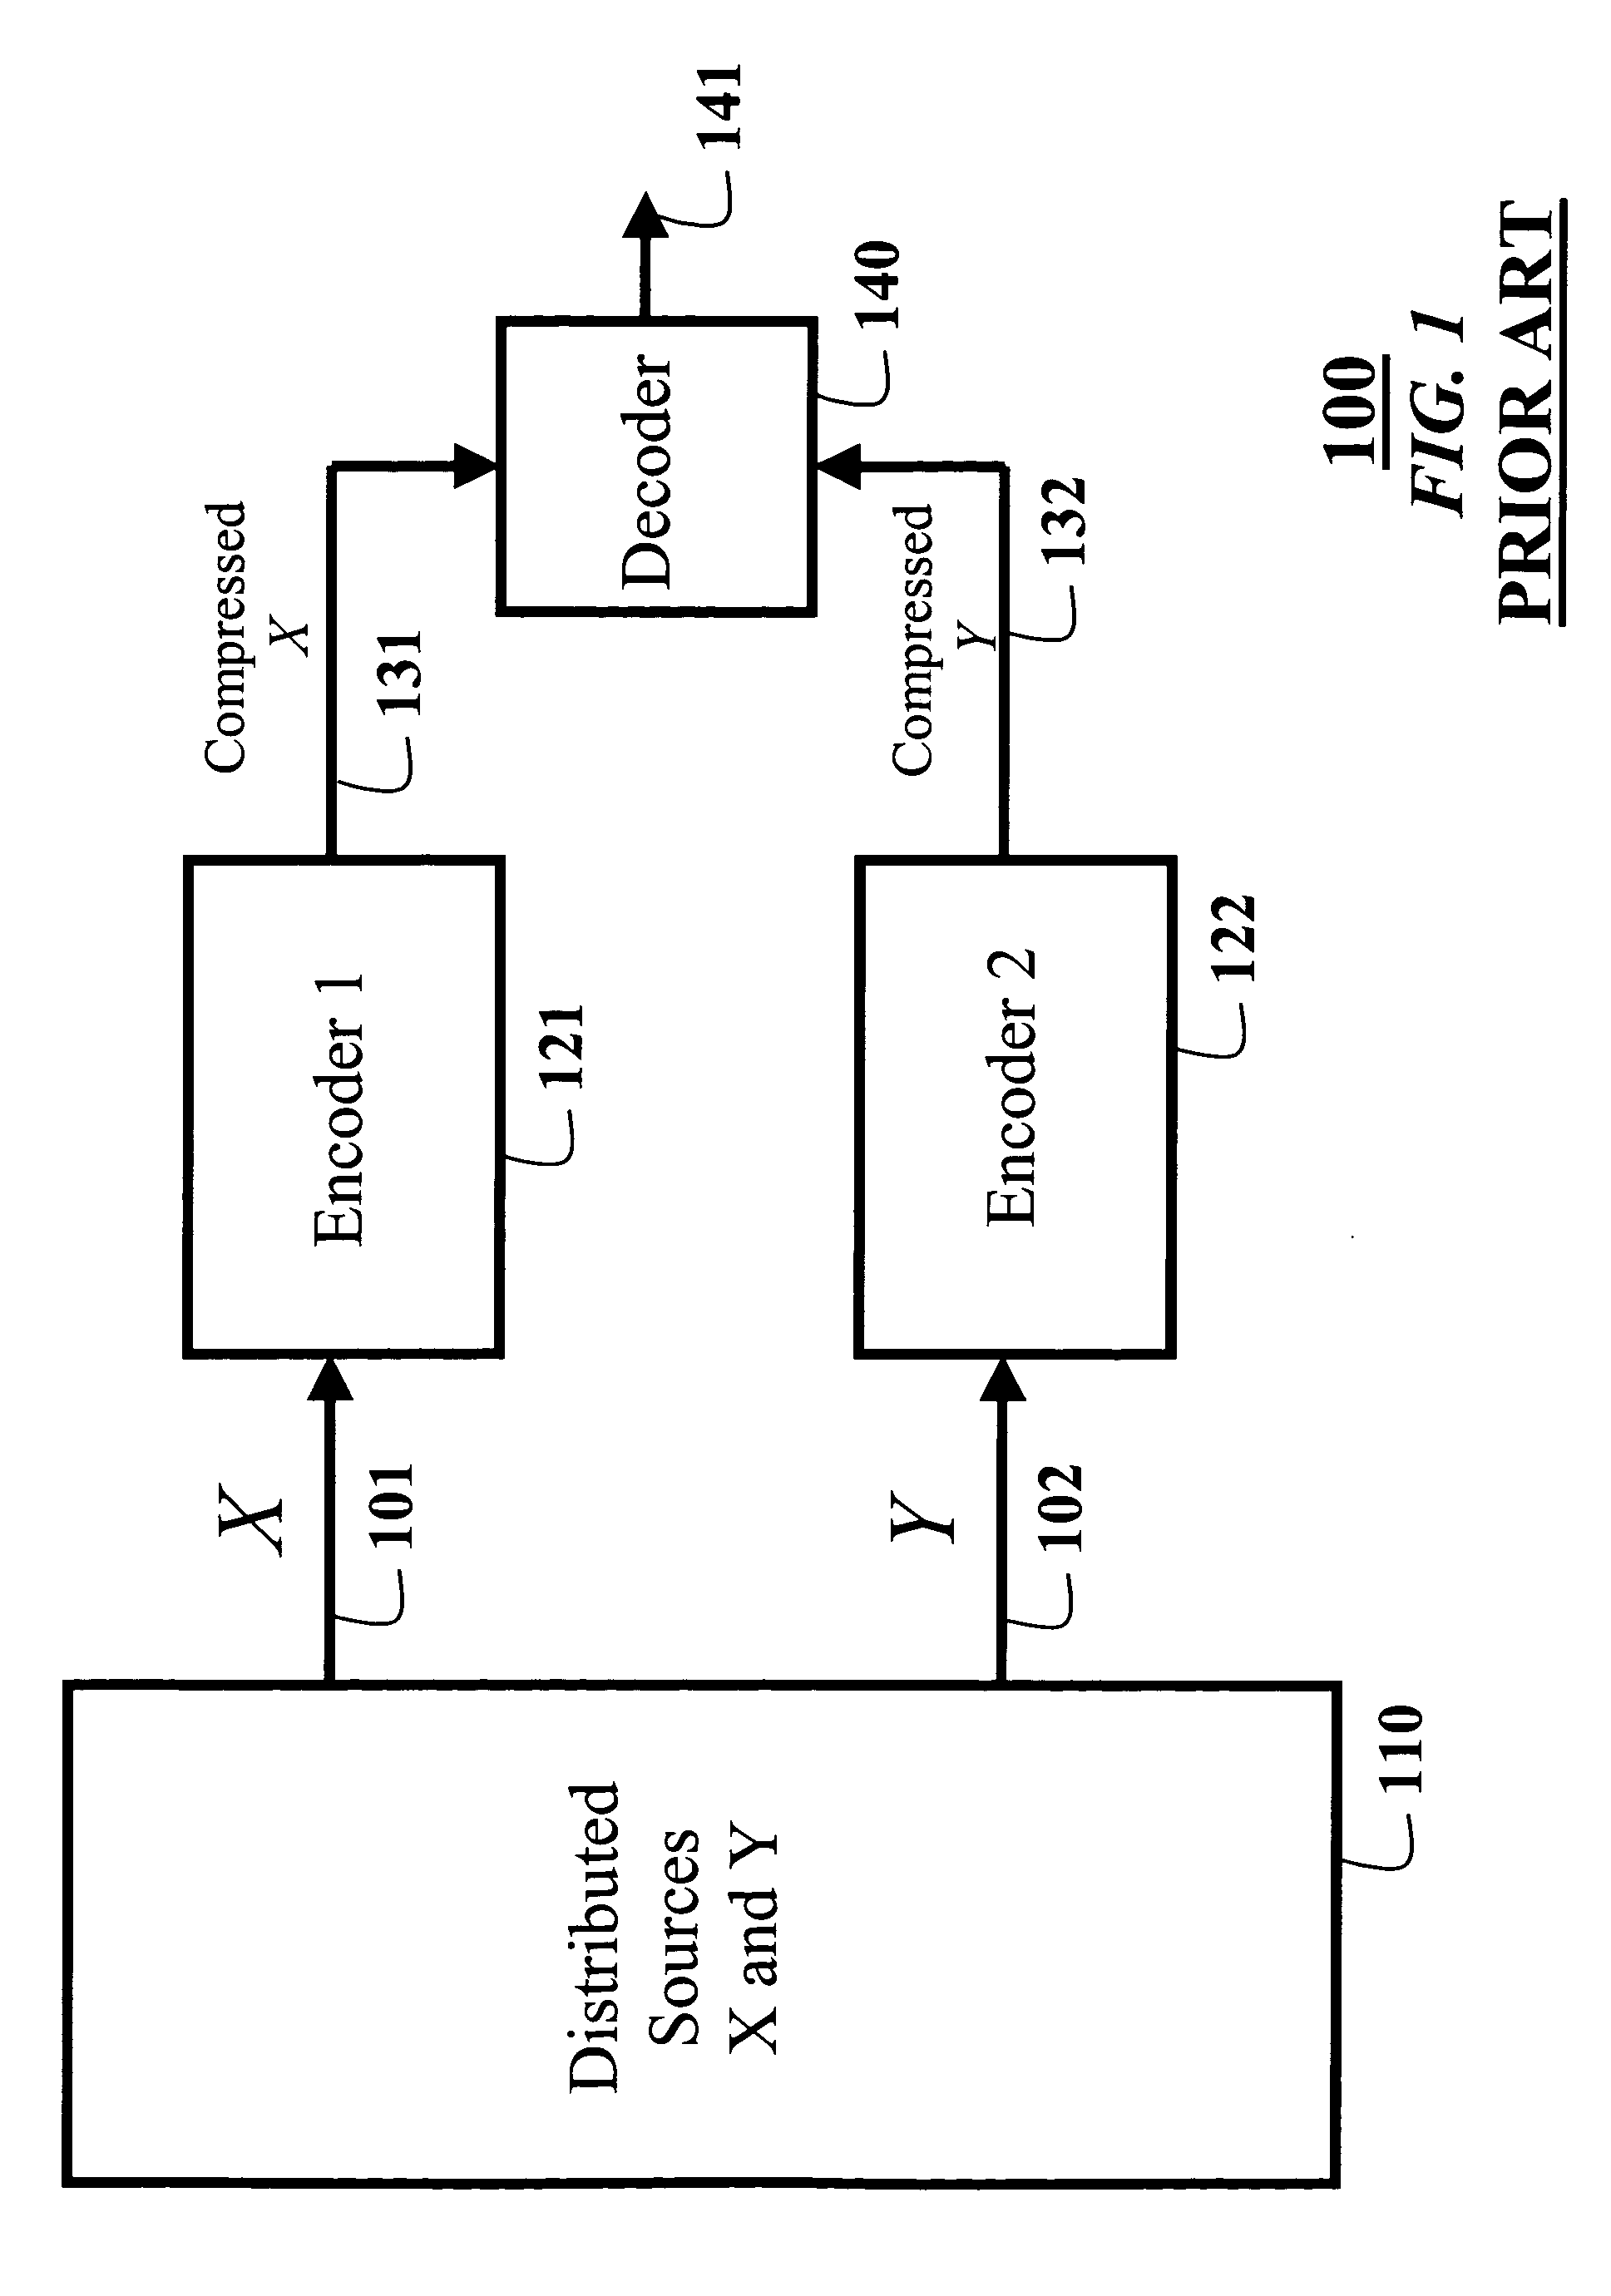 Compressing signals using serially-concatenated accumulate codes